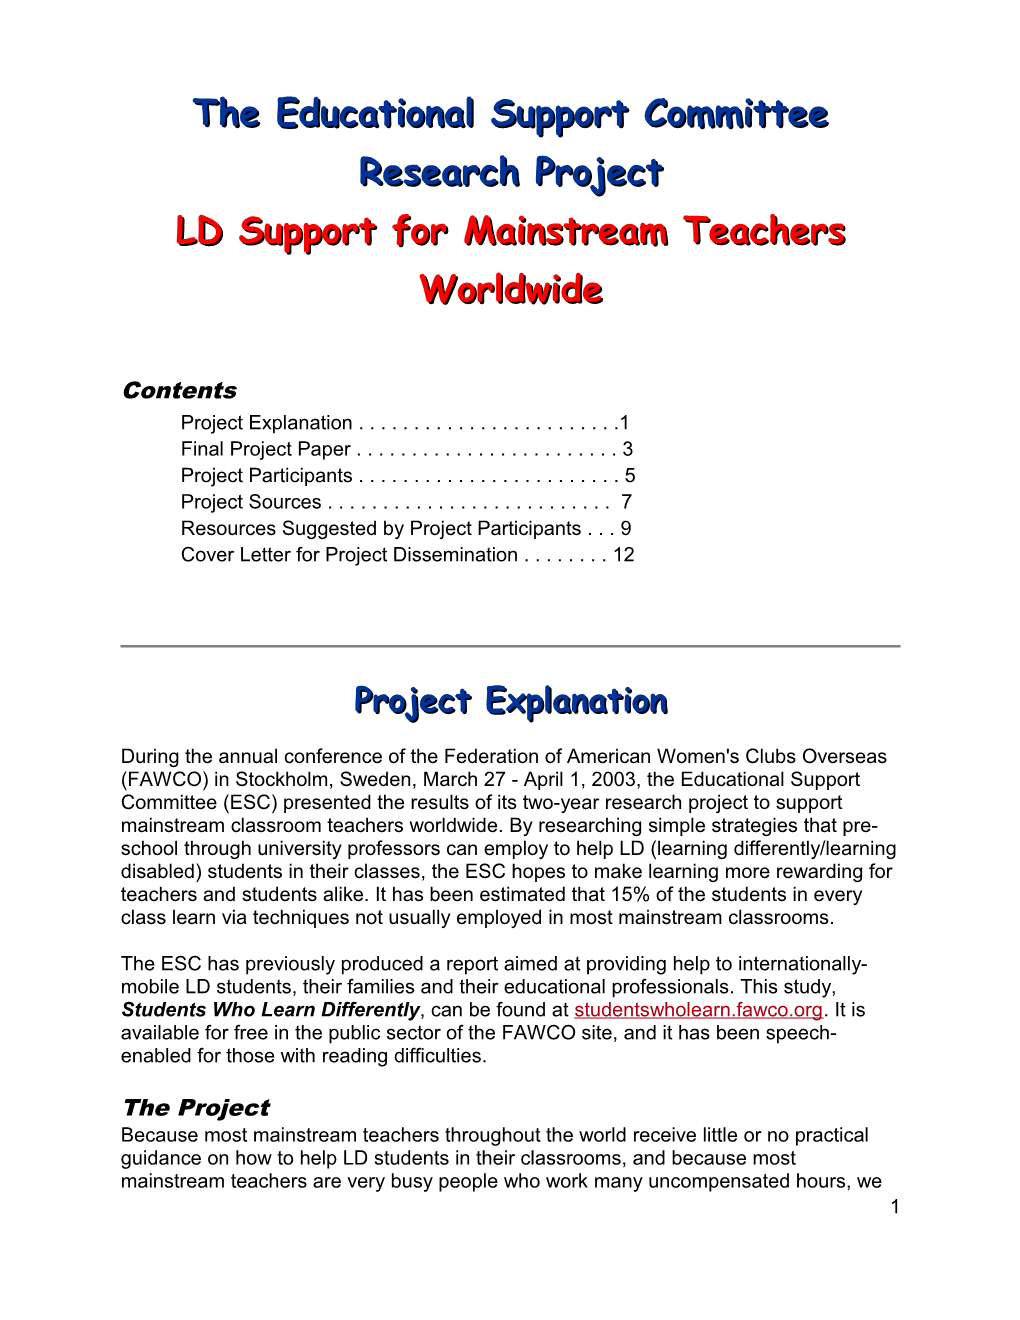 The Educational Support Committee Research Project